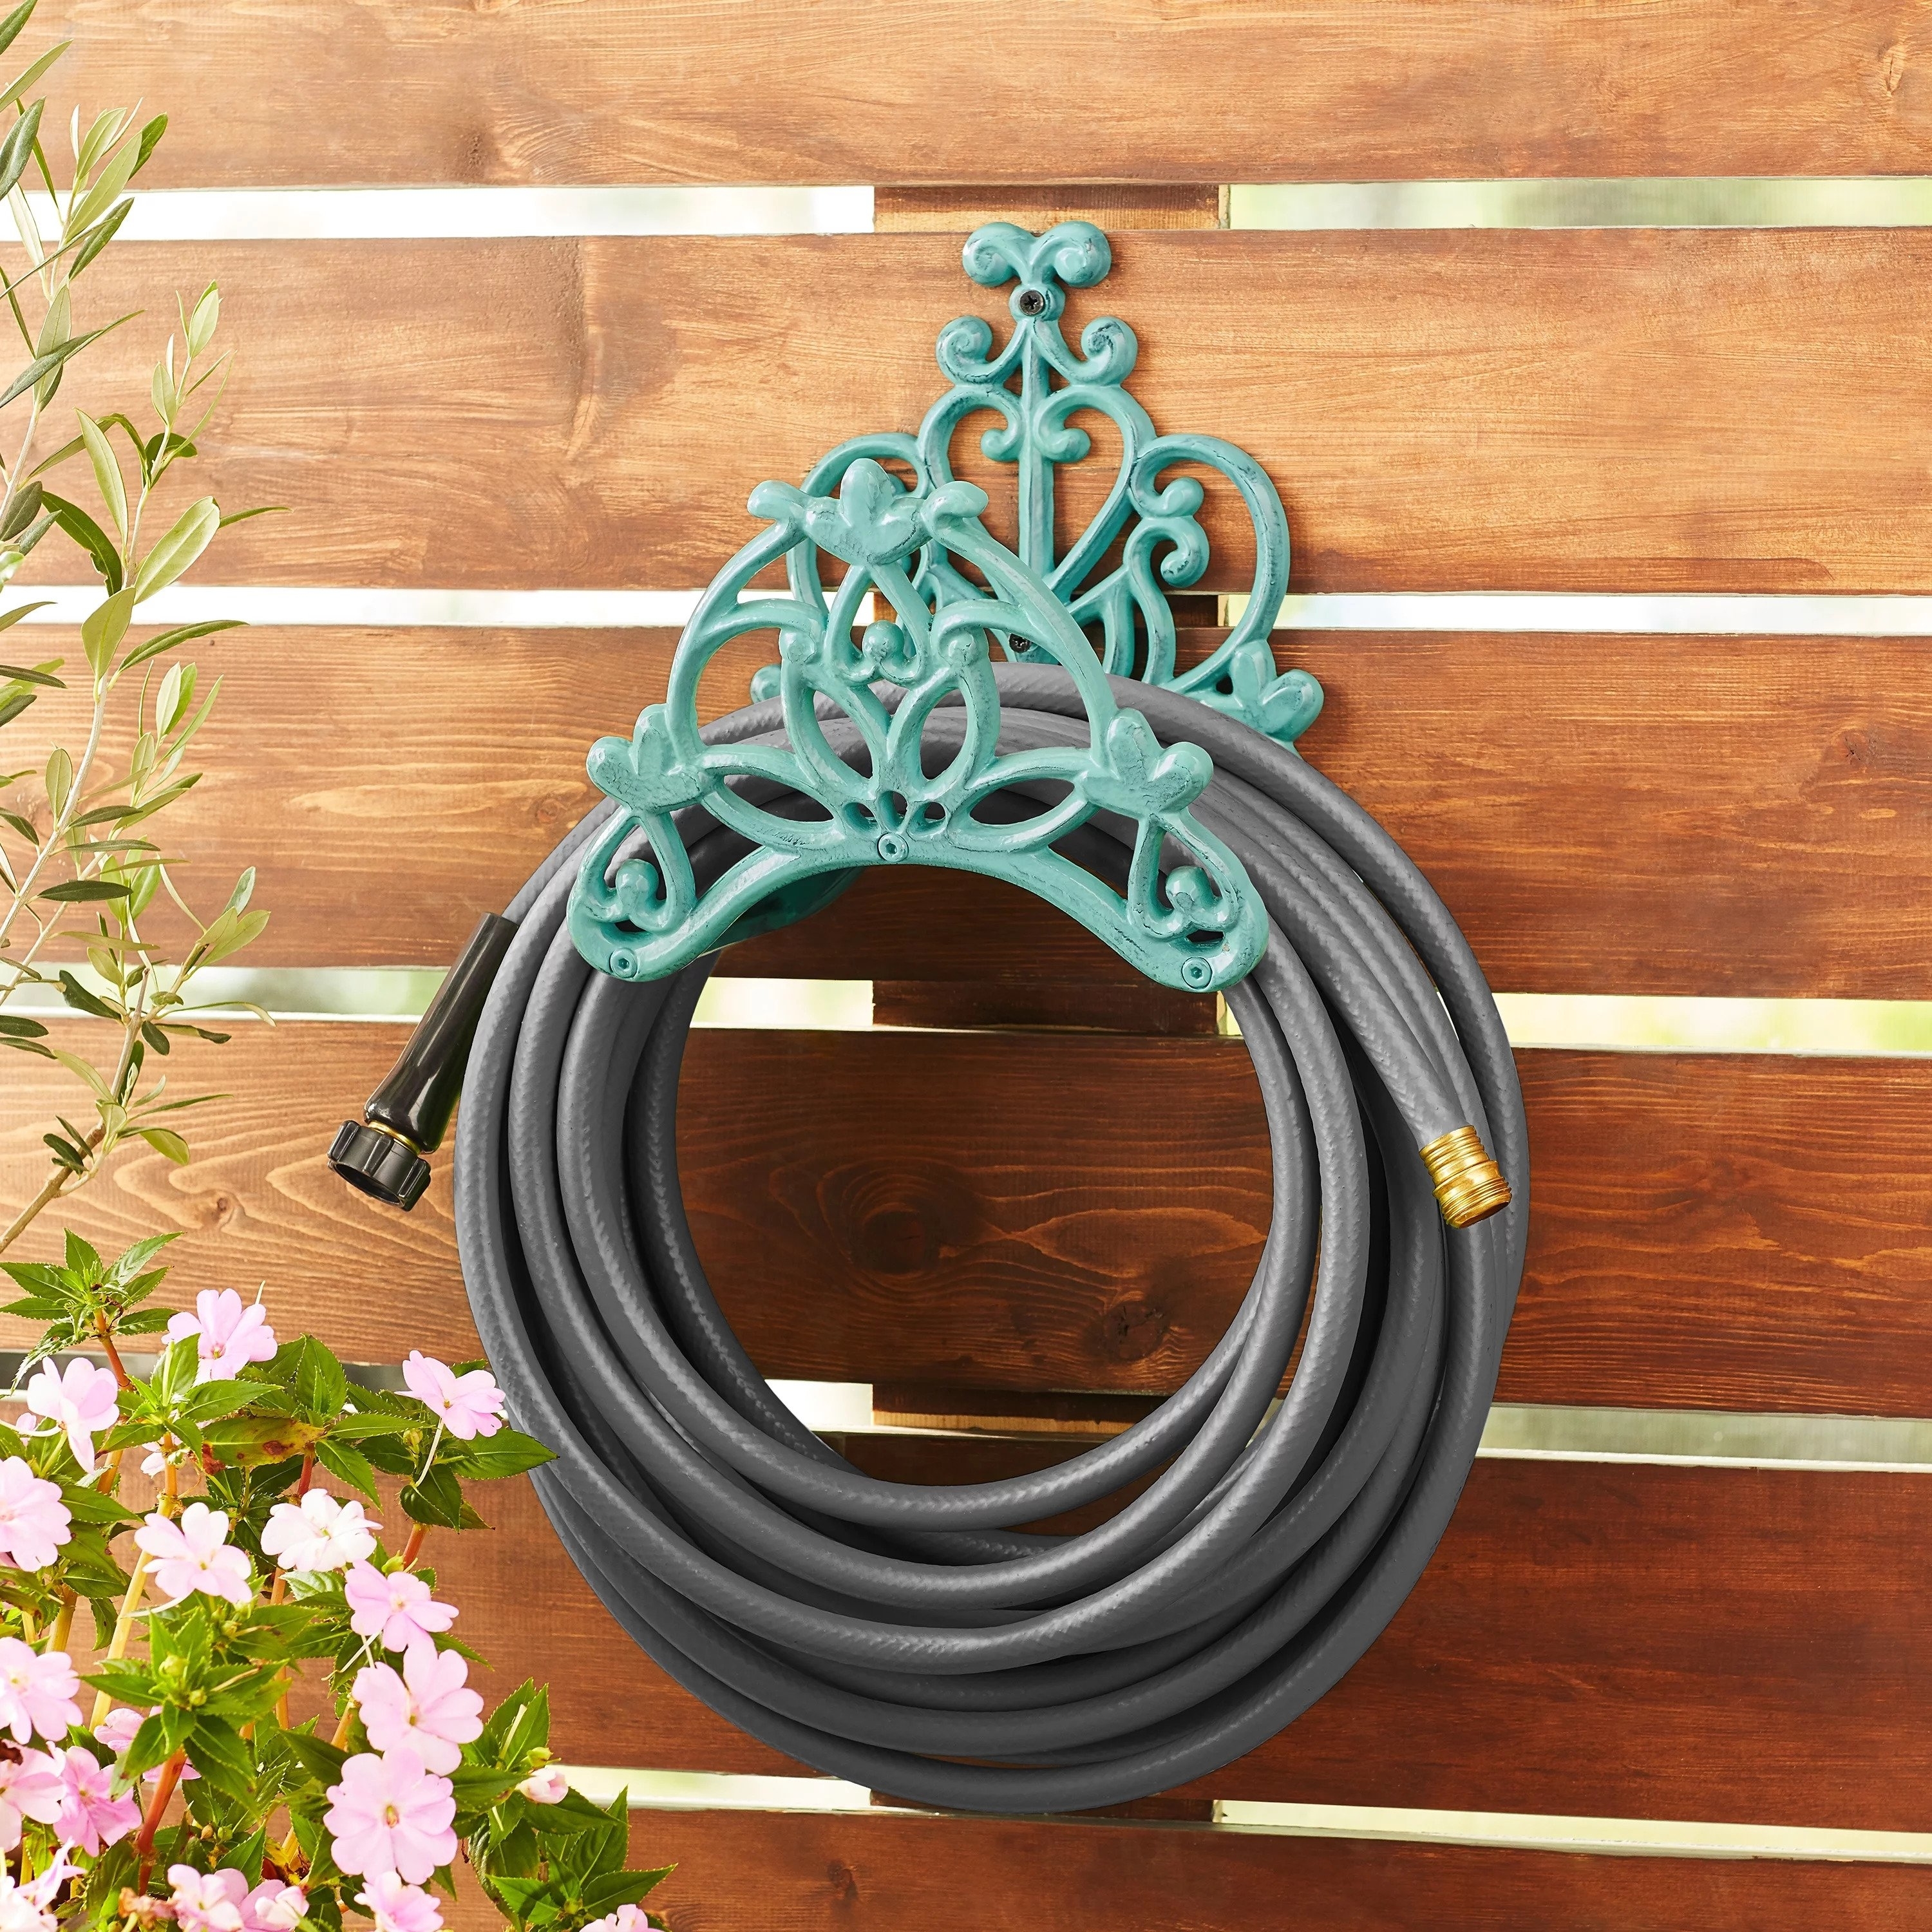 The teal iron-wrought hose hanger mounted on a wall